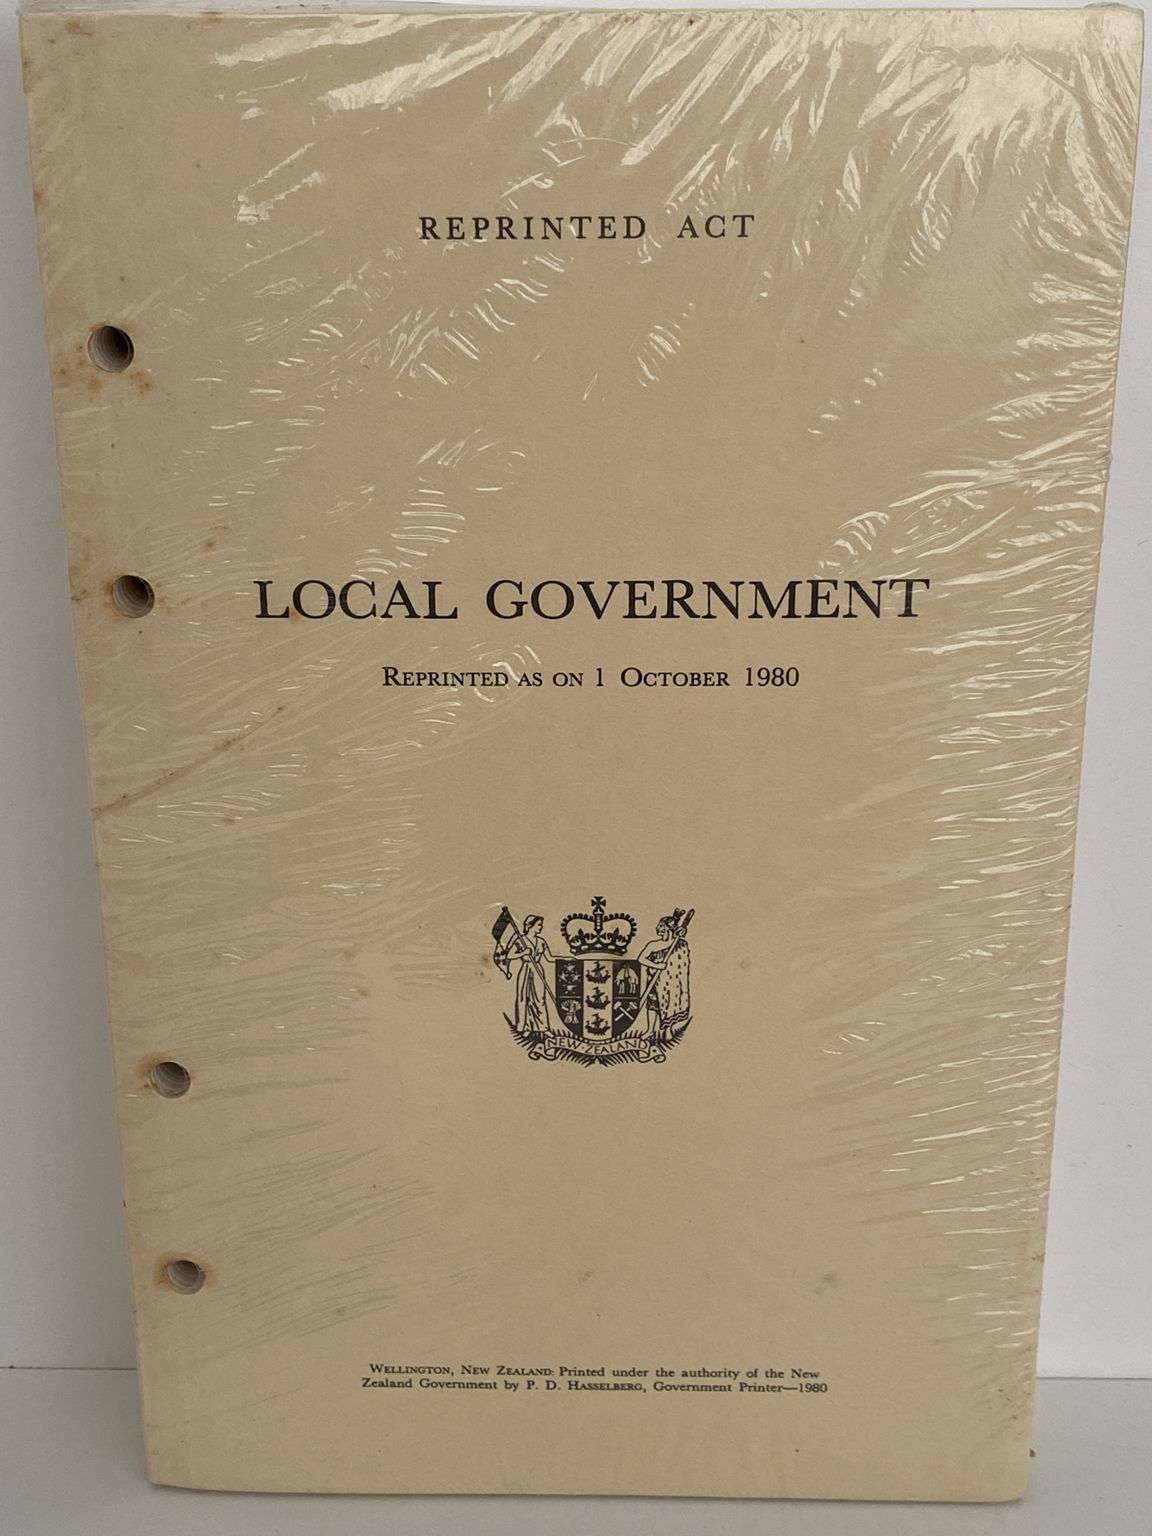 REPRINTED ACT of LOCAL GOVERMENT of NEW ZEALAND October 1981